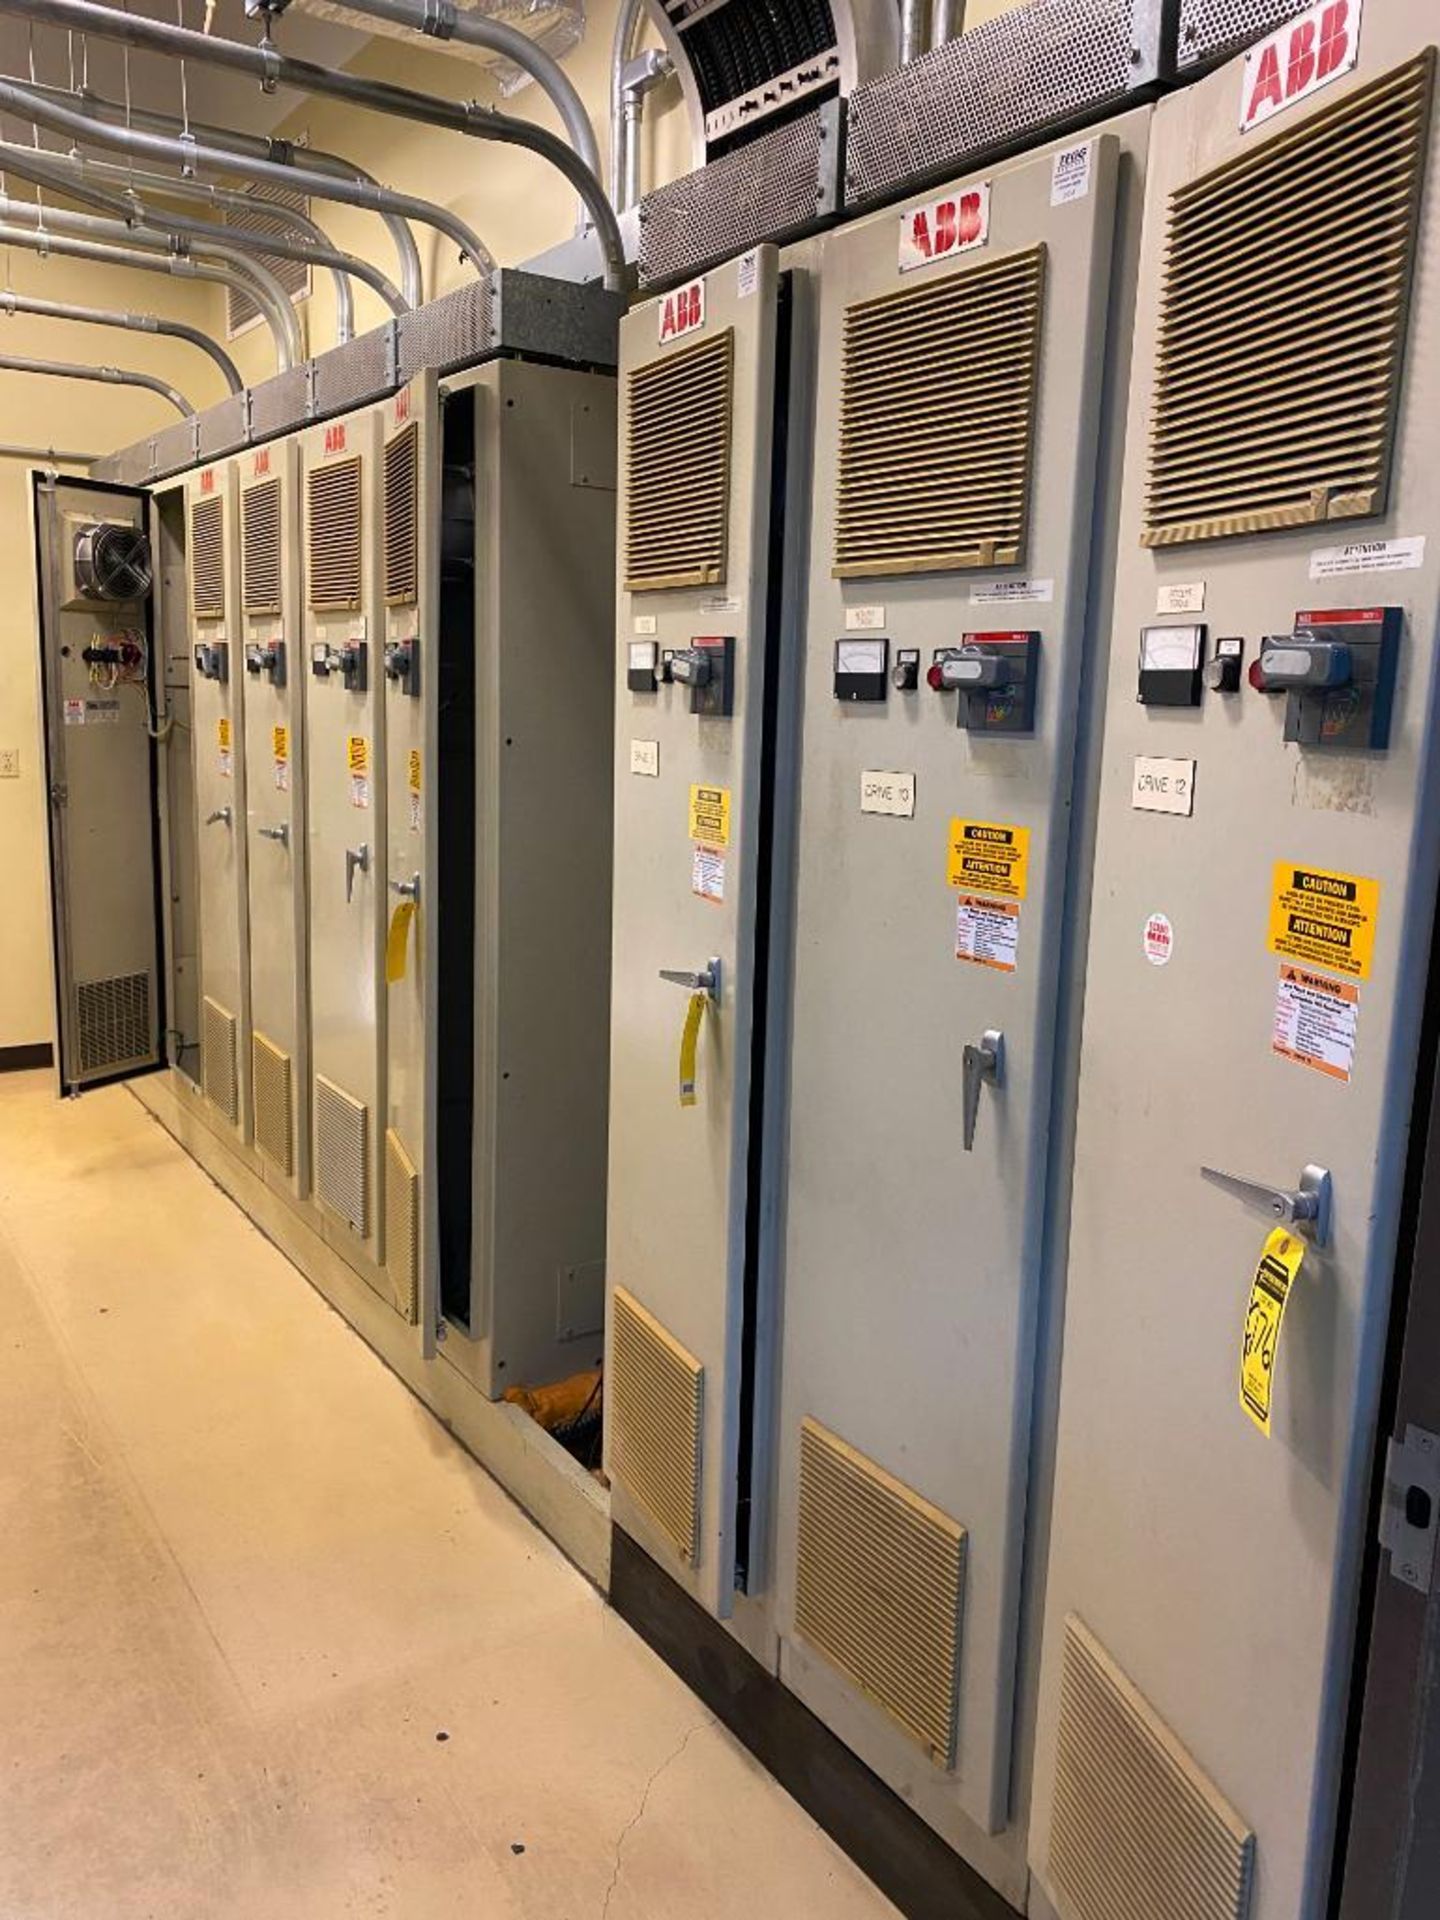 (17) ABB DRIVE CABINETS, S/N 834 S-262523 (NO WIRE, WIRE CUT AS CLOSE TO THE BOX AS POSSIBLE)